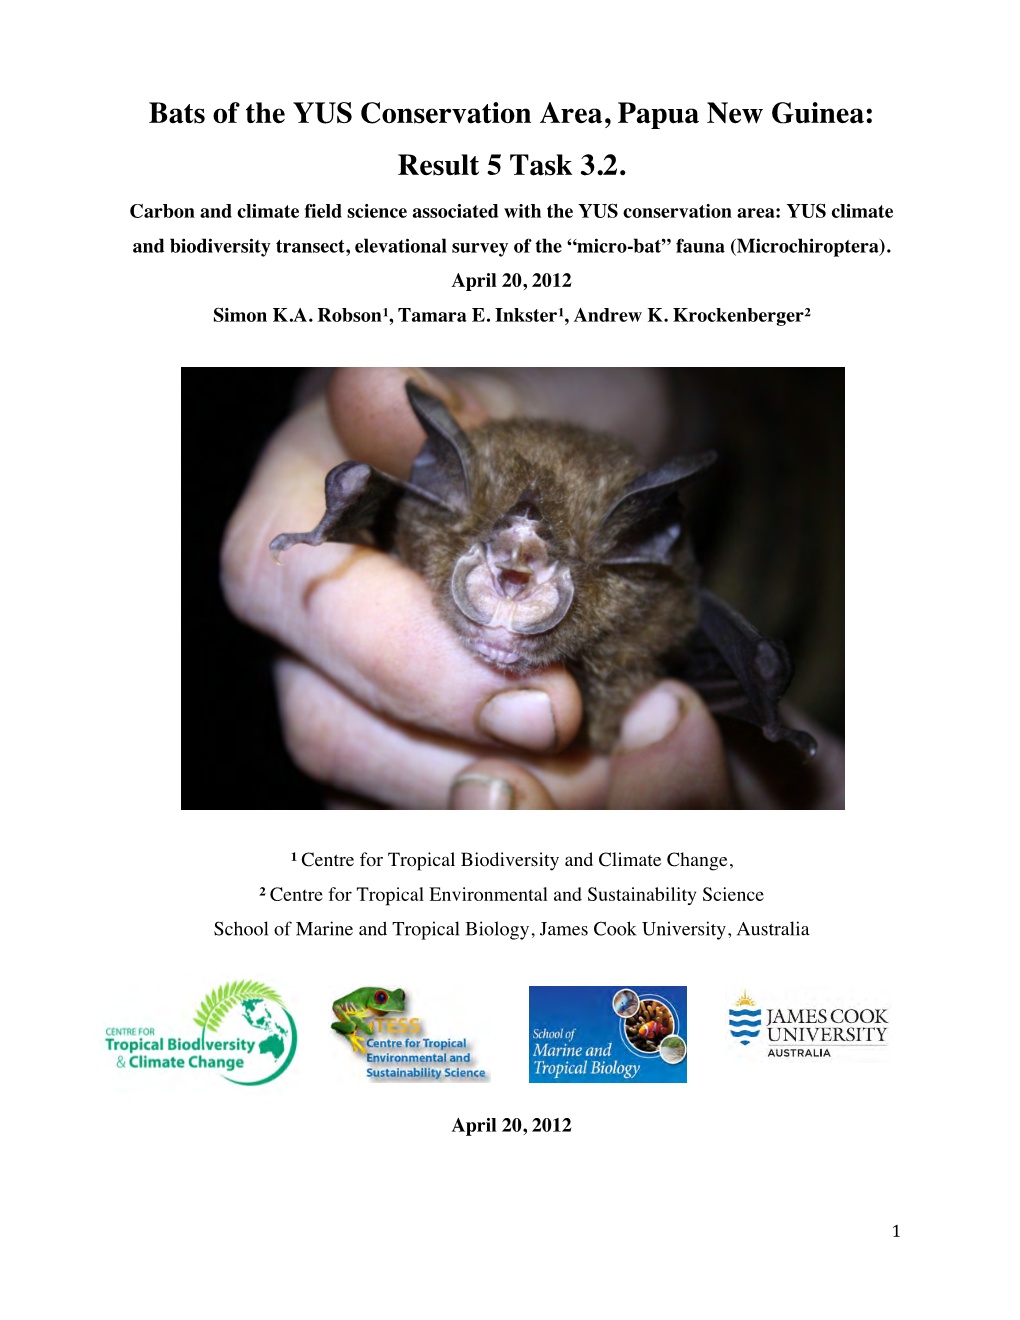 Bats of the YUS Conservation Area, Papua New Guinea: Result 5 Task 3.2